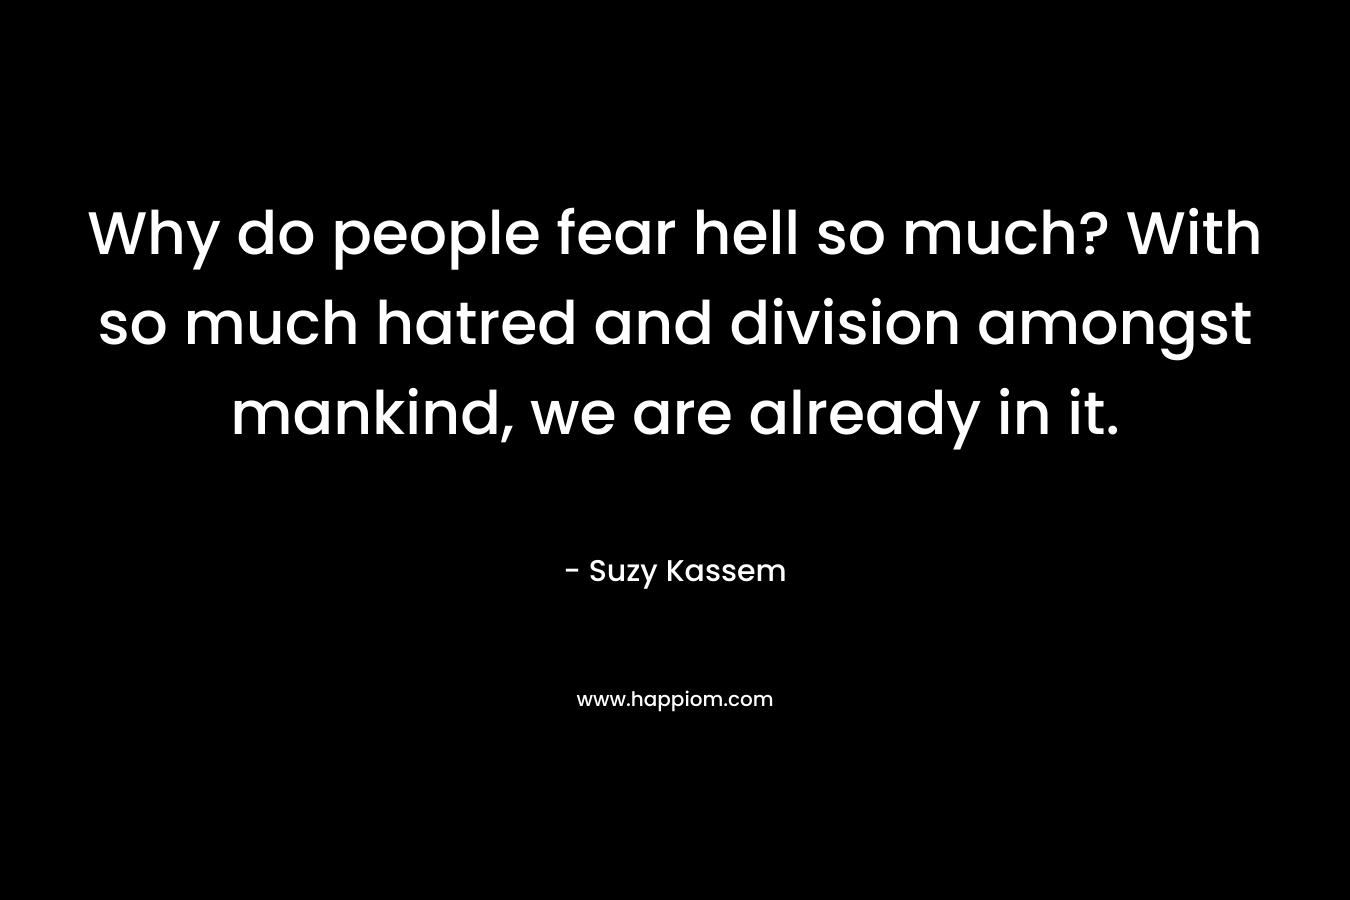 Why do people fear hell so much? With so much hatred and division amongst mankind, we are already in it.